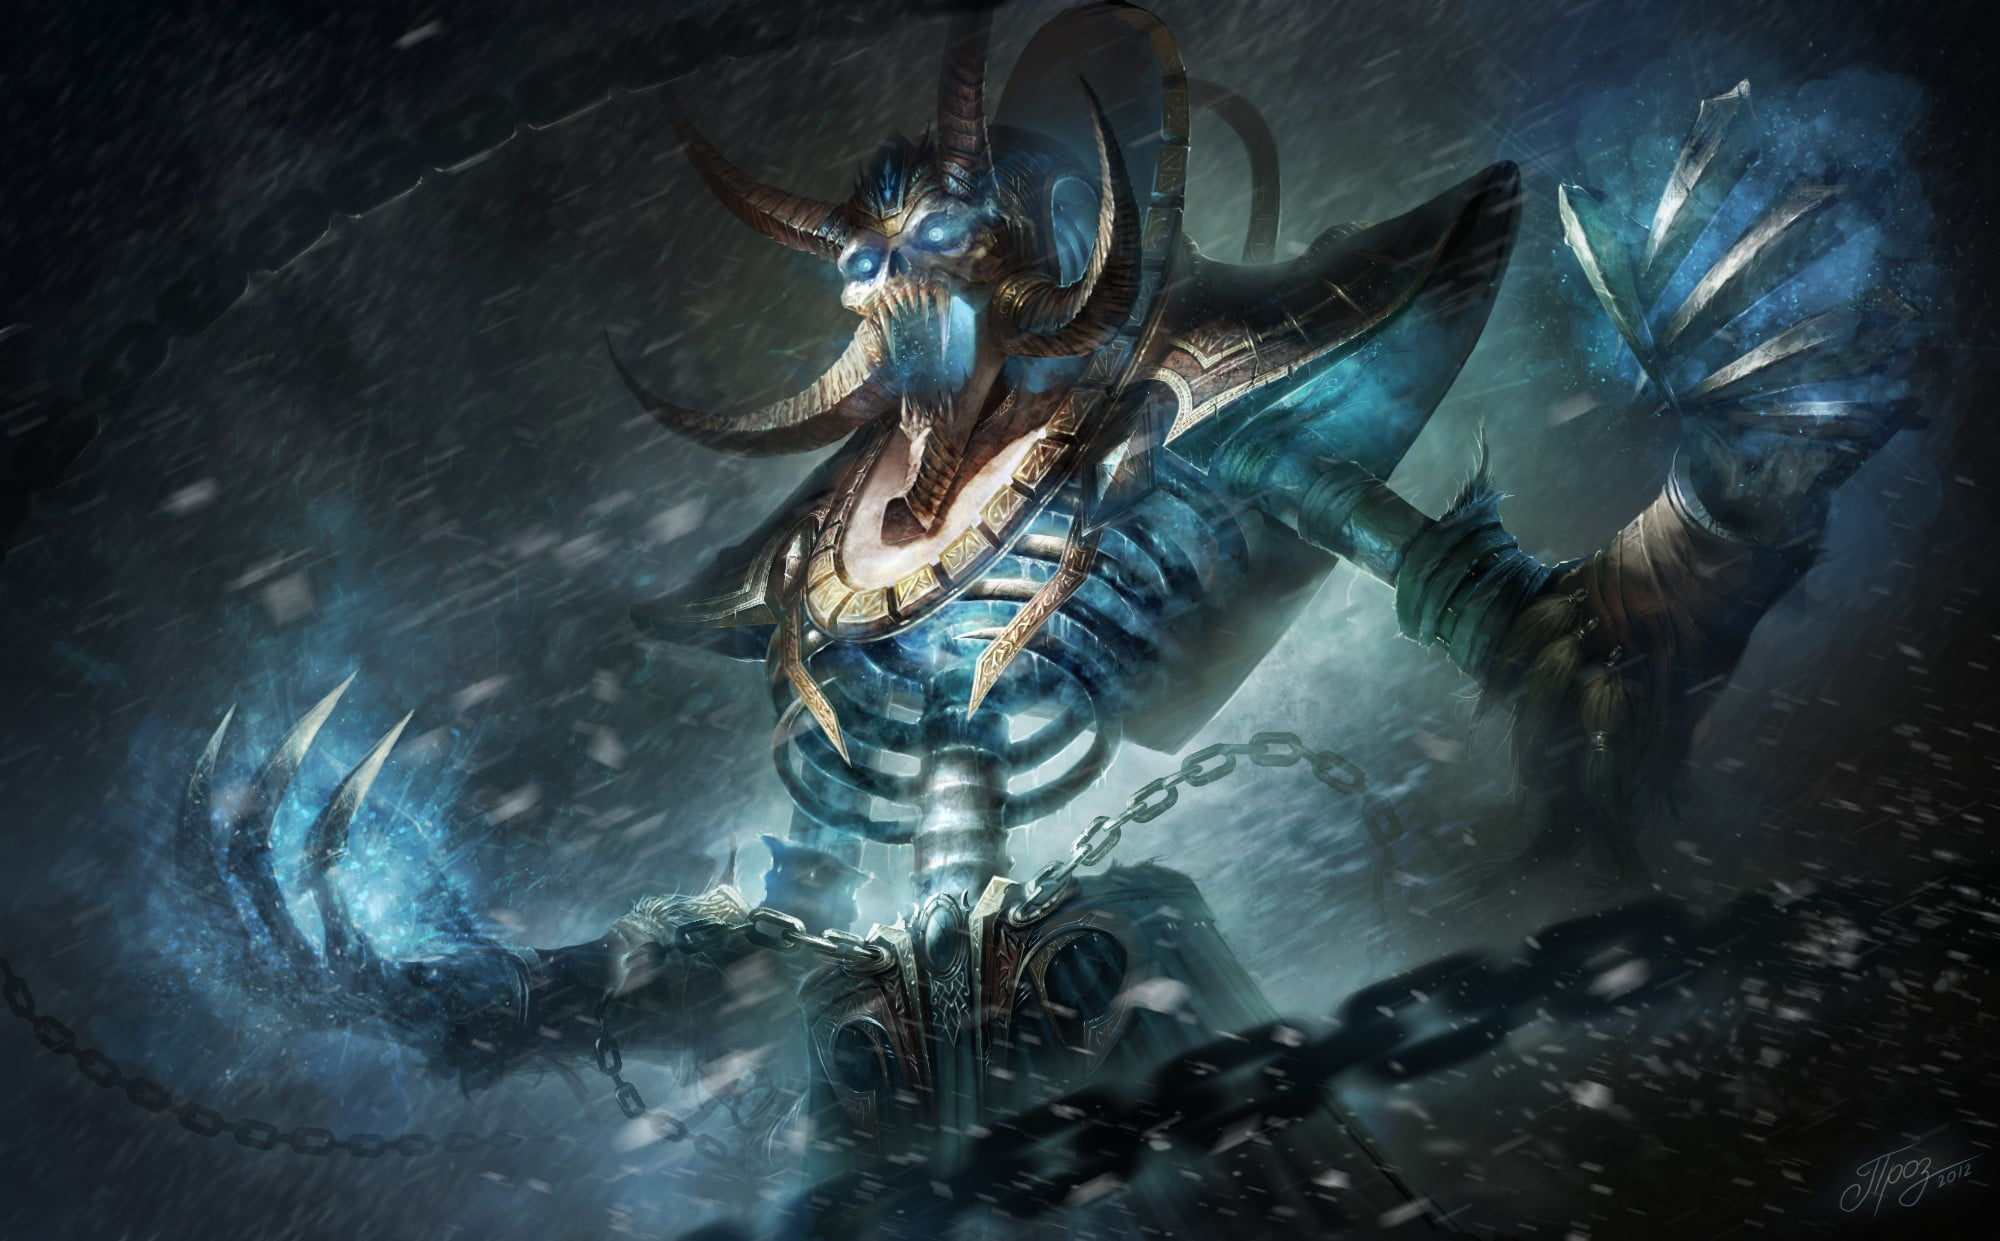 2000x1241 Blue and brown skeleton painting, Kel'Thuzad, World of Warcraft: Wrath of the Lich King, Warcraft III HD wallpaper